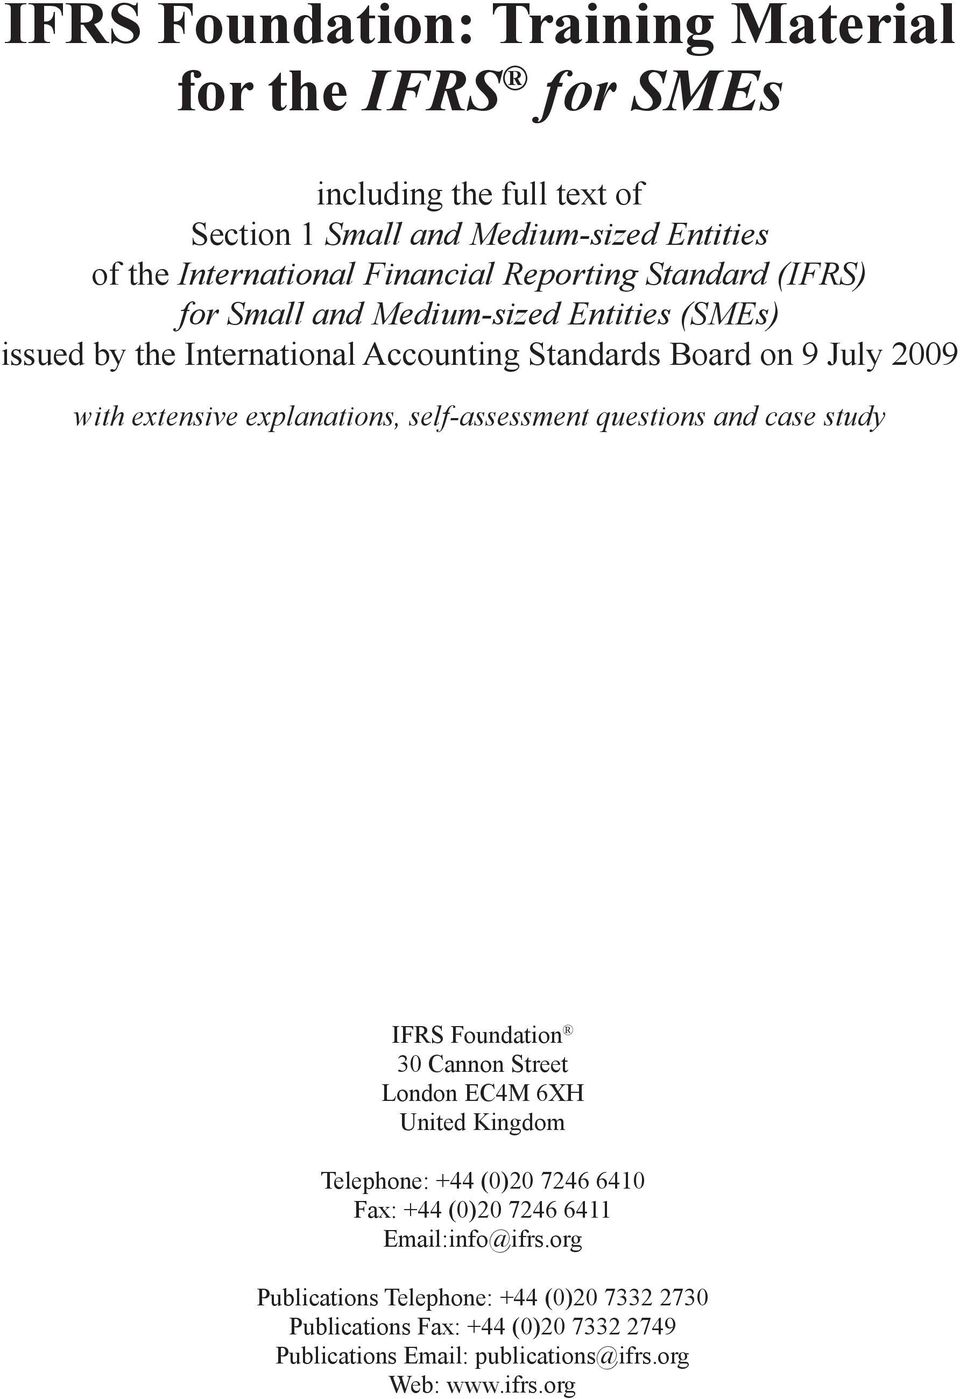 explanations, self-assessment questions and case study IFRS Foundation 30 Cannon Street London EC4M 6XH United Kingdom Telephone: +44 (0)20 7246 6410 Fax: +44